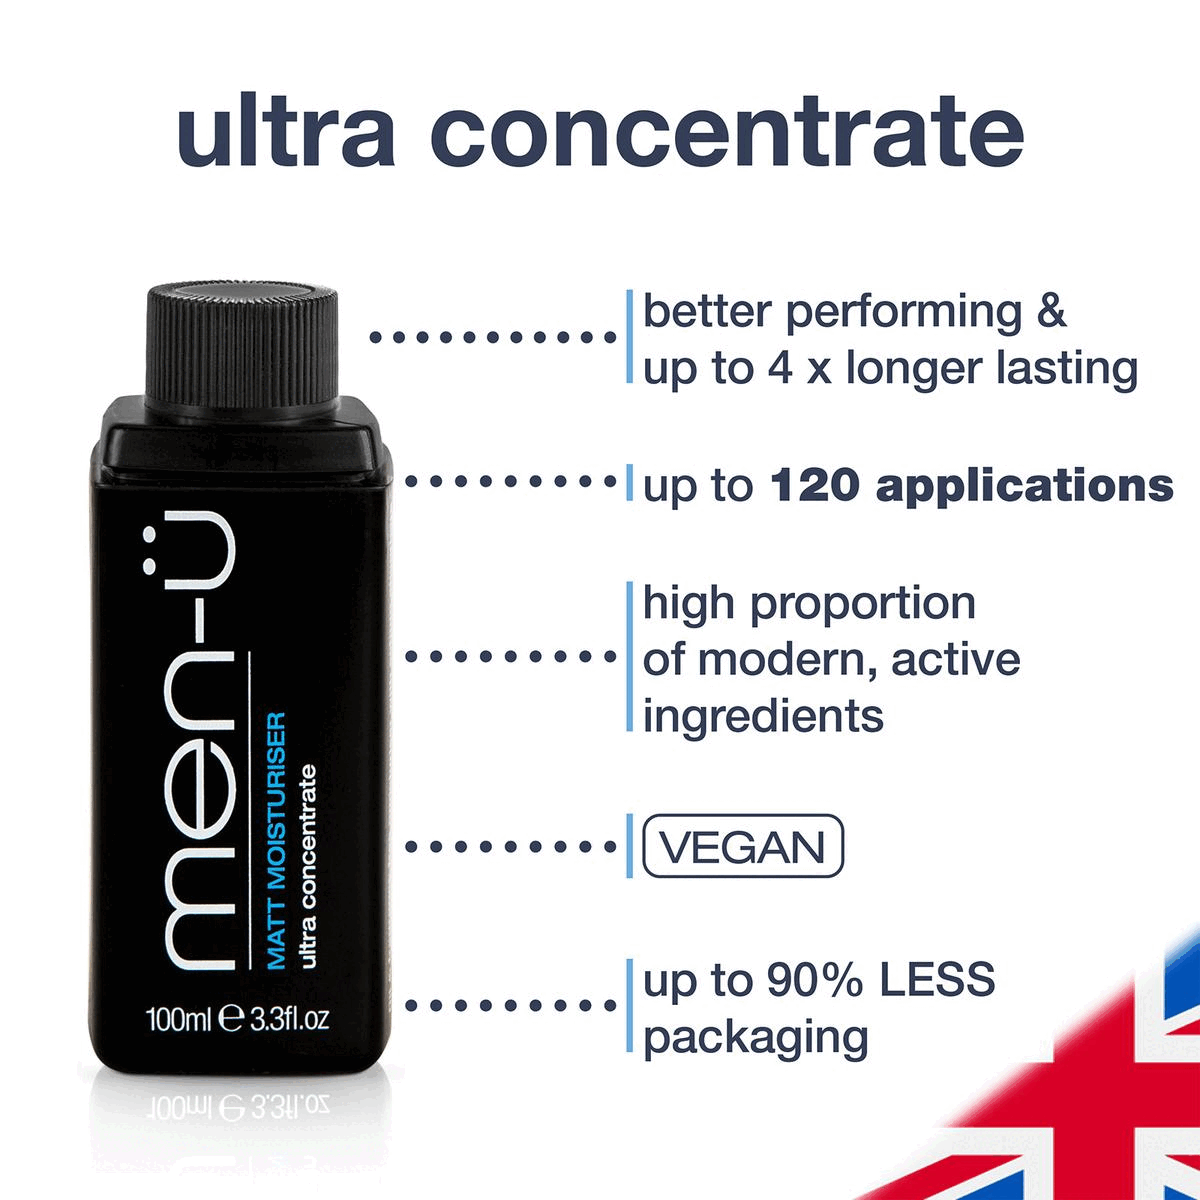 Ultra concentrate Benefits. More products benefits.Gel benefits.Directions on how to use